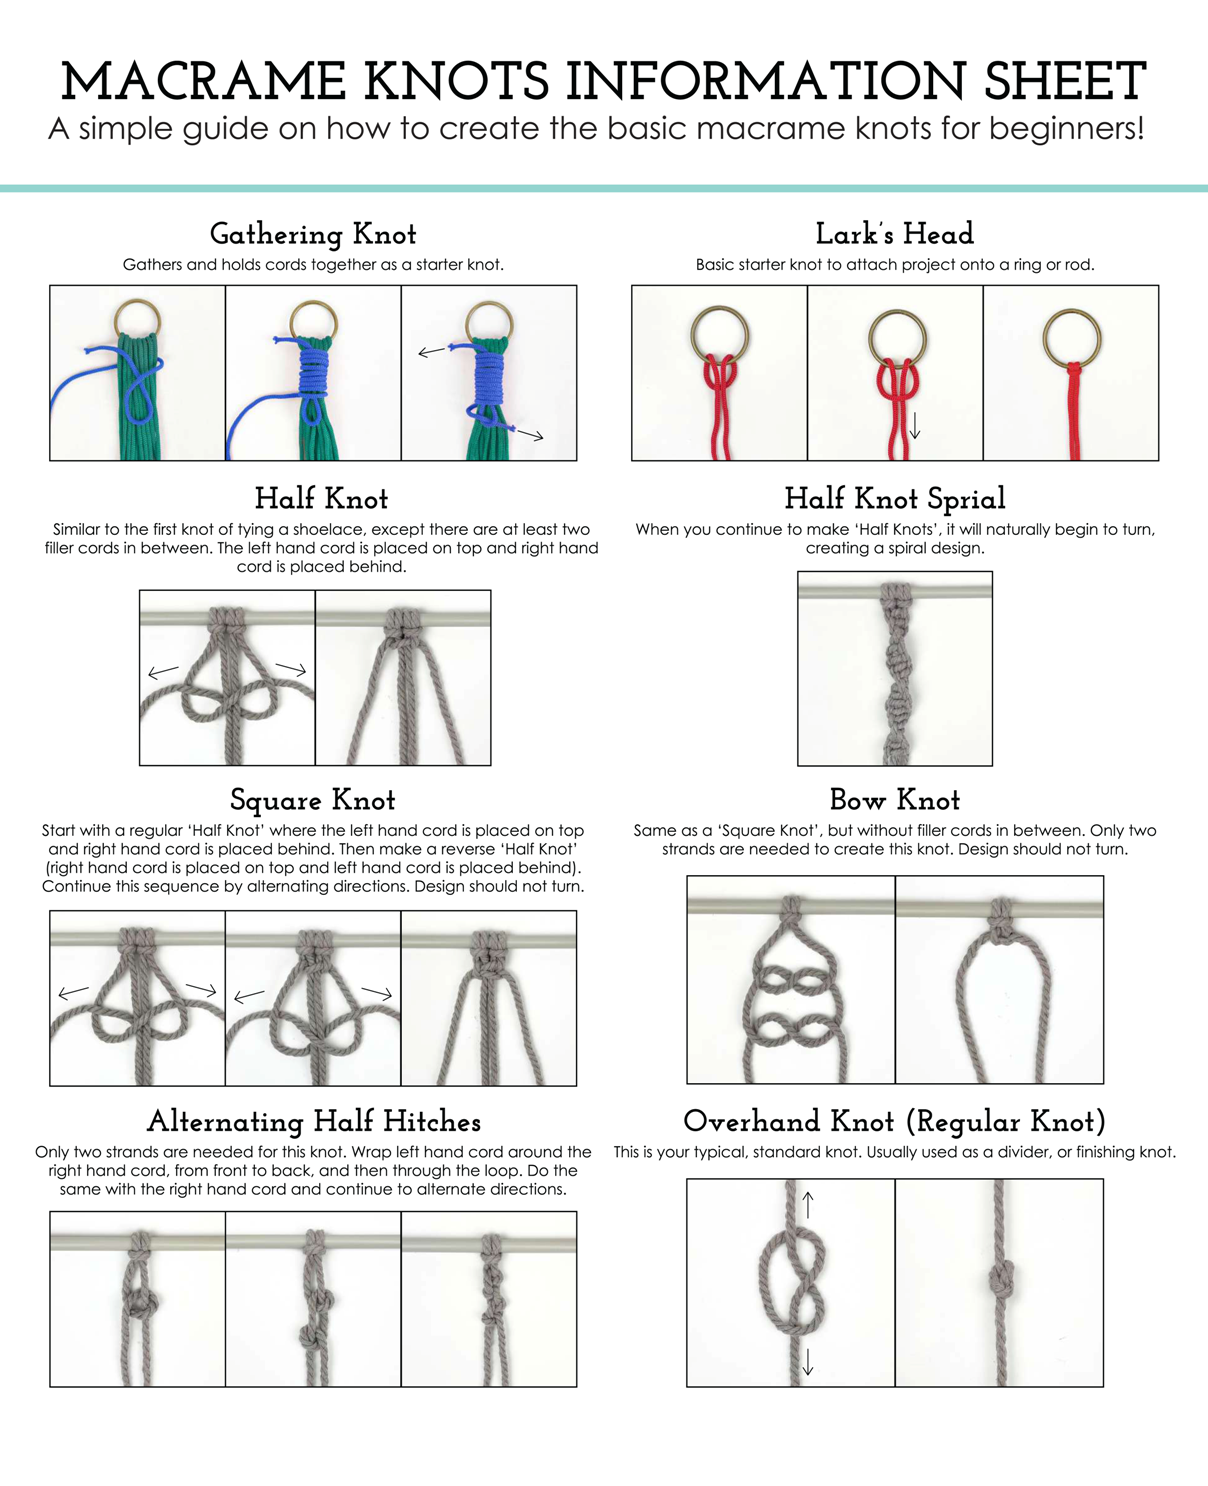 Detailed info sheet to help you create different basic knots for your project.